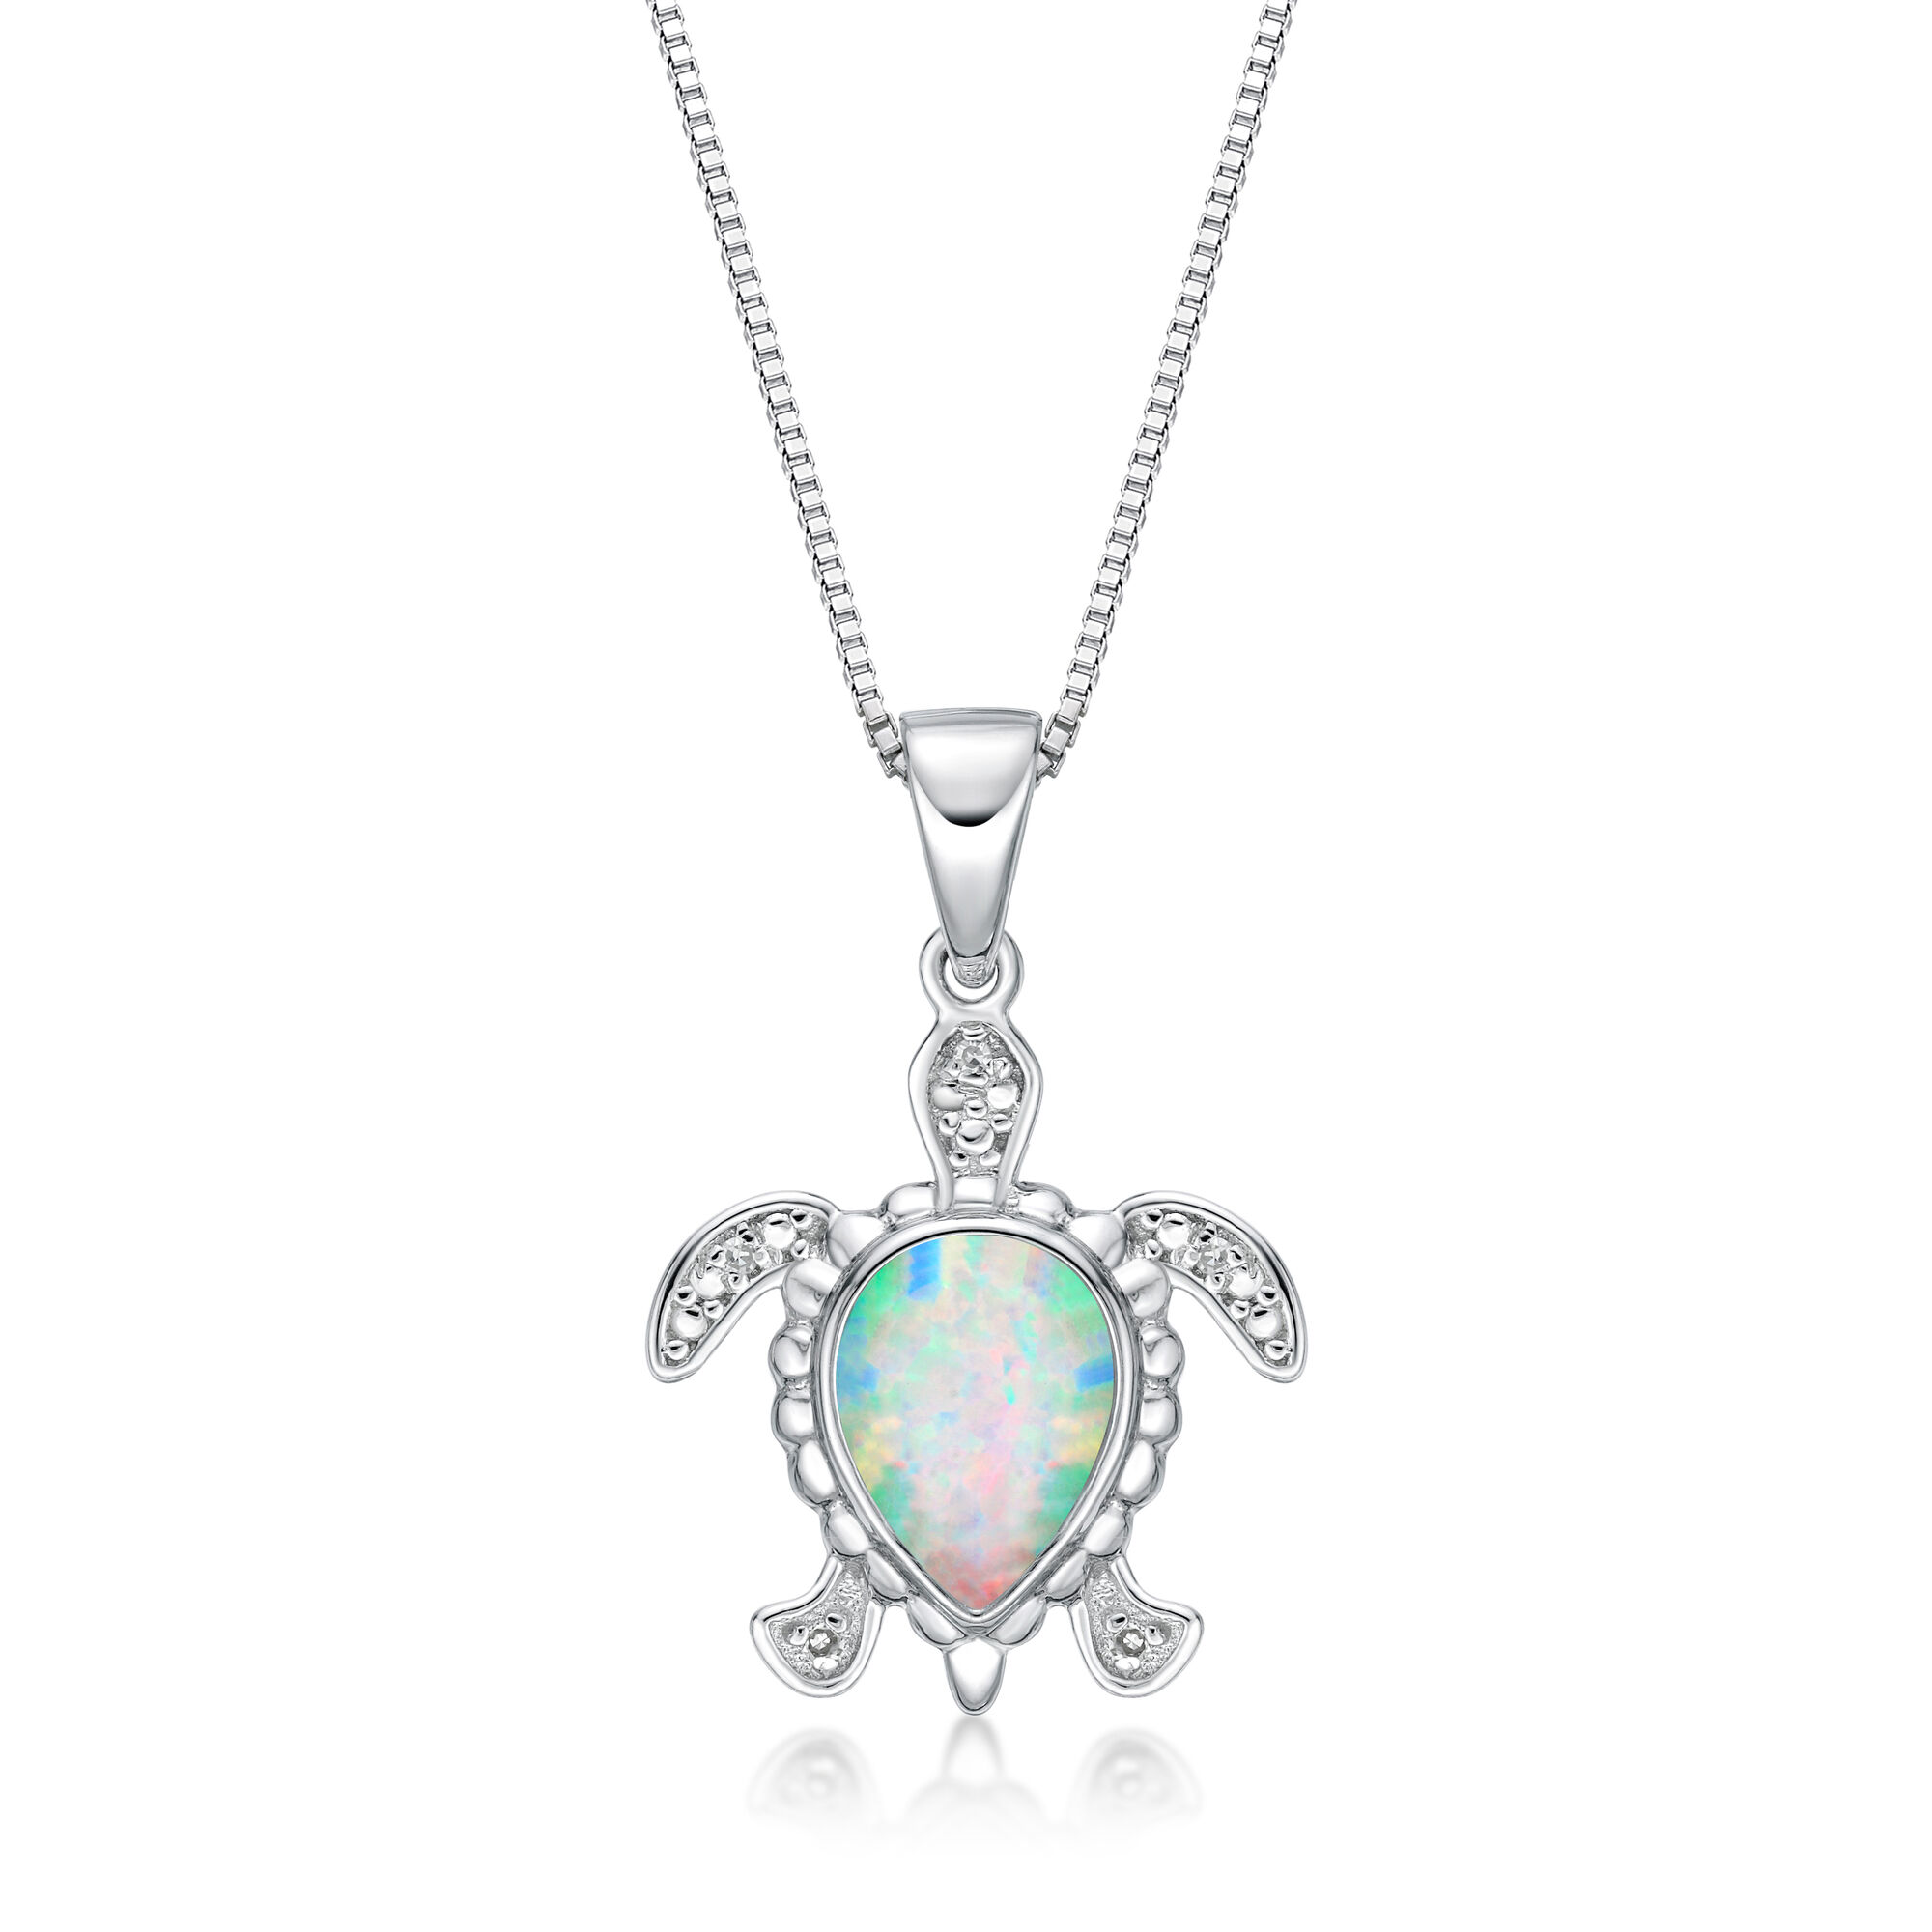 Lavari Jewelers Women's Created White Opal Turtle Diamond Pendant with Lobster Clasp, Sterling Silver, .015 Cttw, 18 Inch Cable Chain